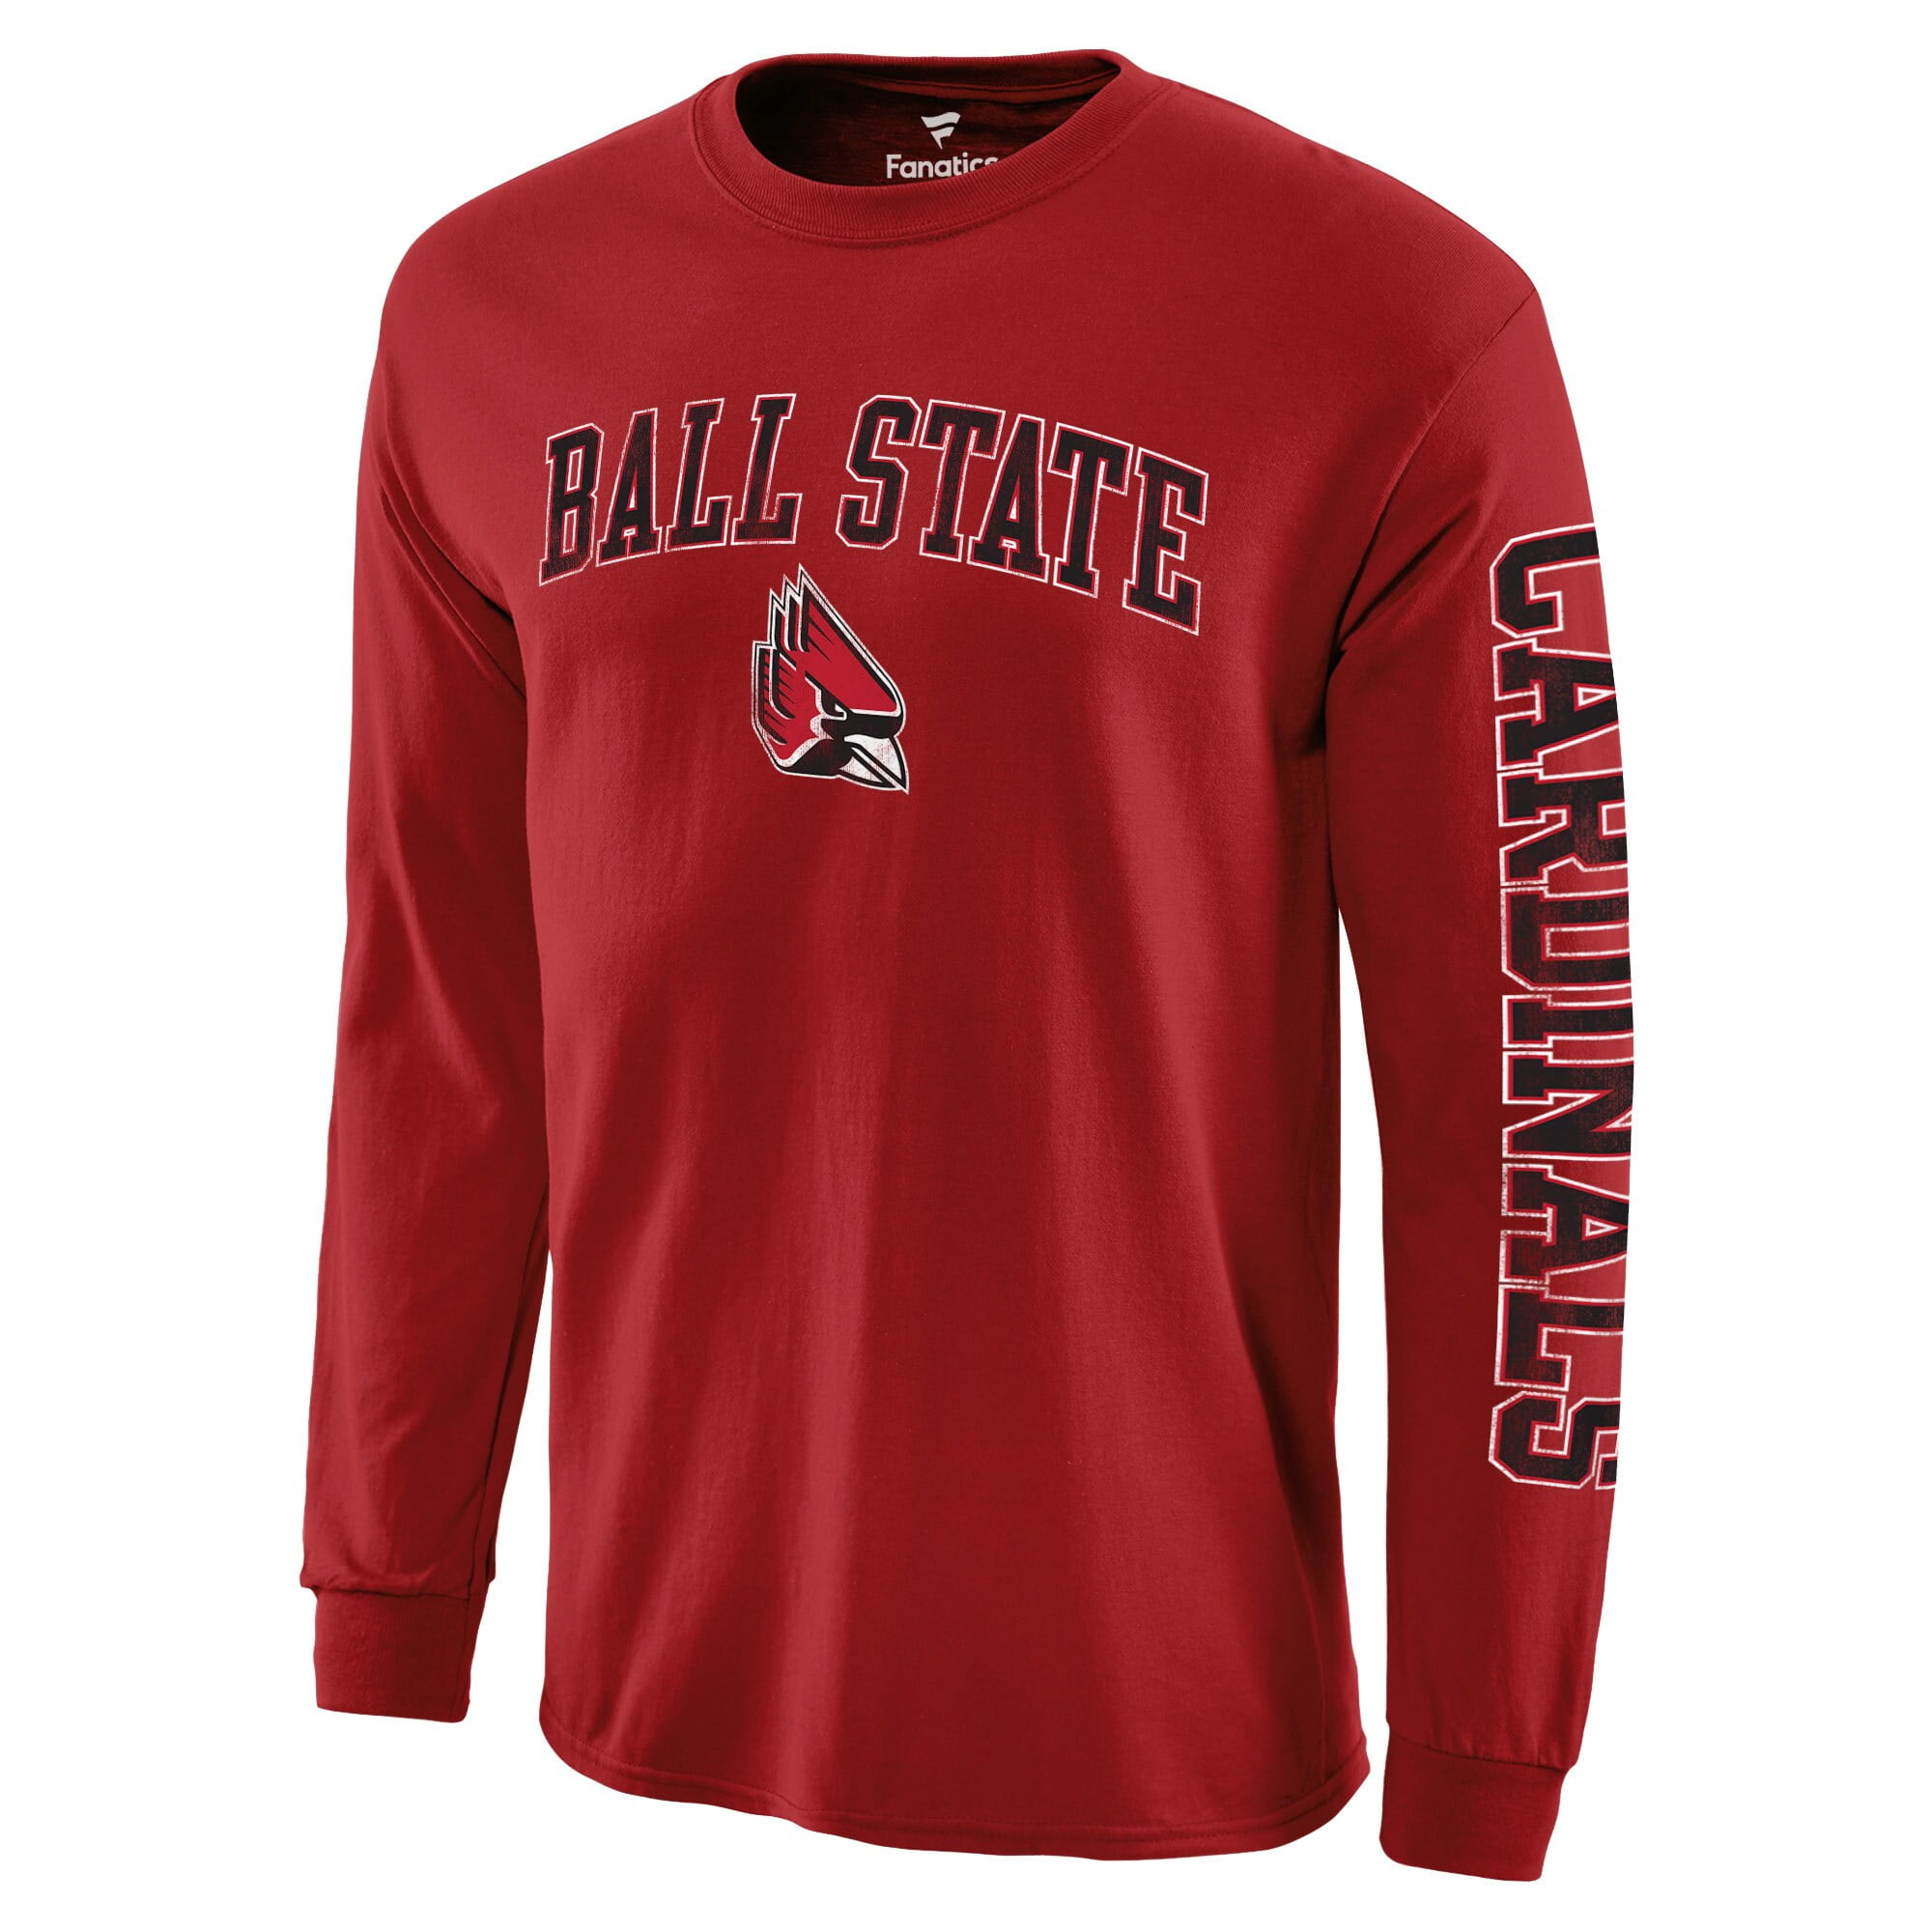 Men's Fanatics Branded Red Ball State Cardinals Distressed Arch Over Logo Long  Sleeve T-Shirt 